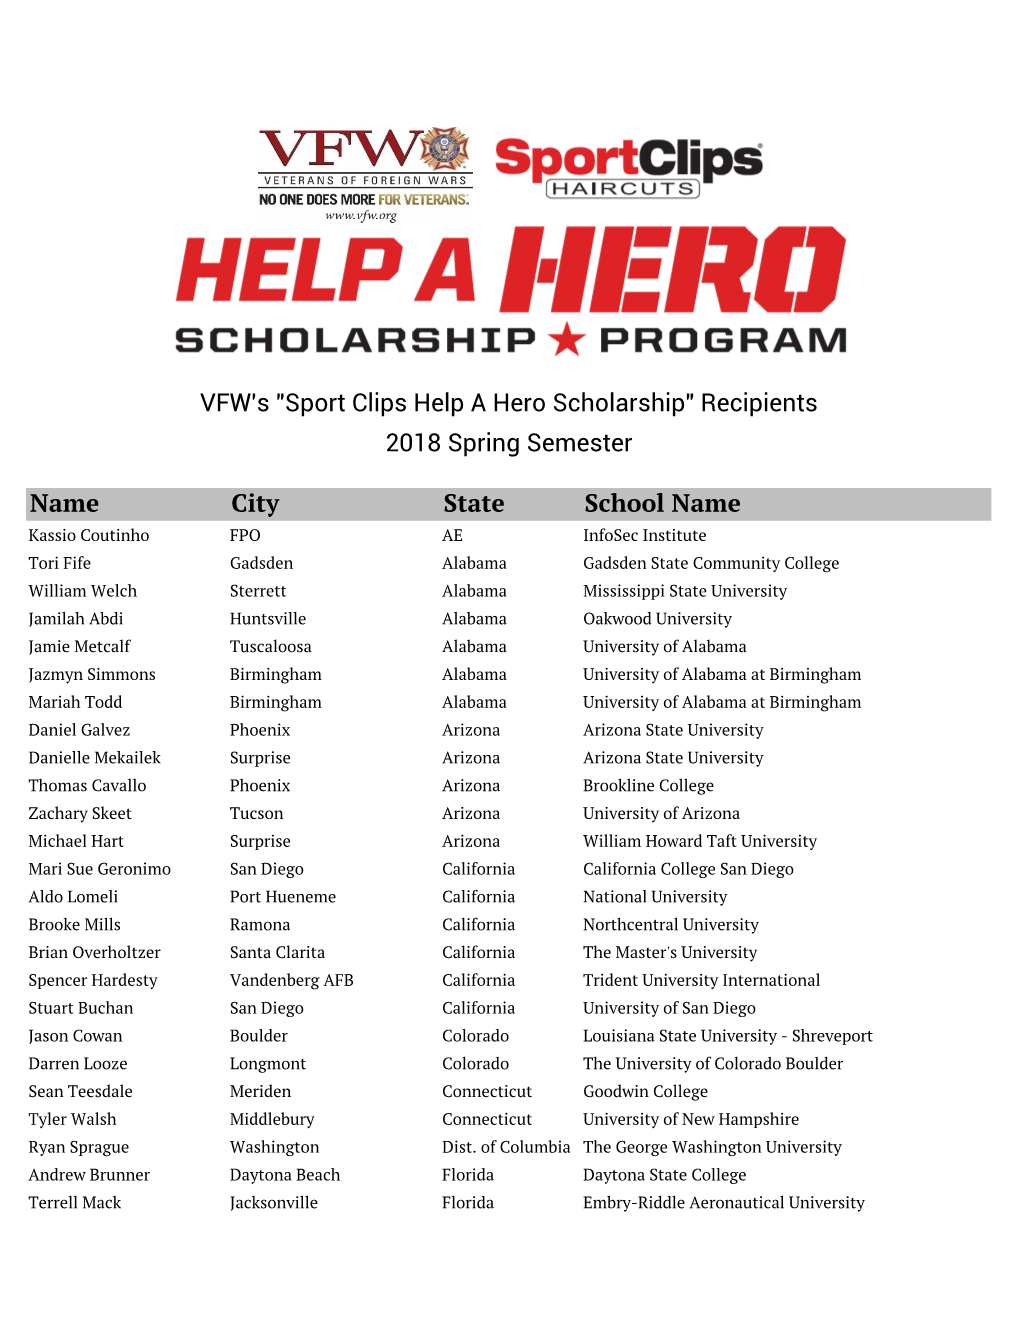 Name City State School Name VFW's "Sport Clips Help a Hero Scholarship"